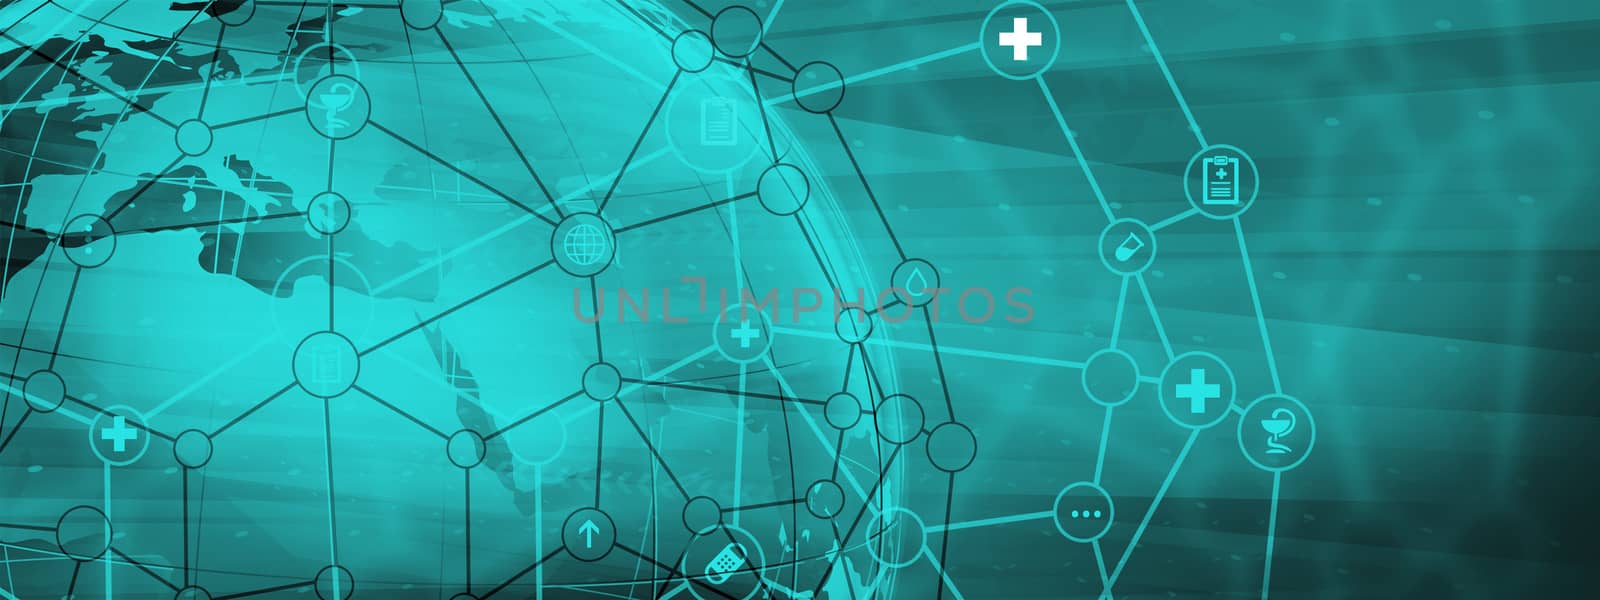 Abstract Worldwide Health Care Background. Illustration of  Futuristic Medical Technology Concept. Blank Space for Your Contents, Template, Communication, Business and Web Design